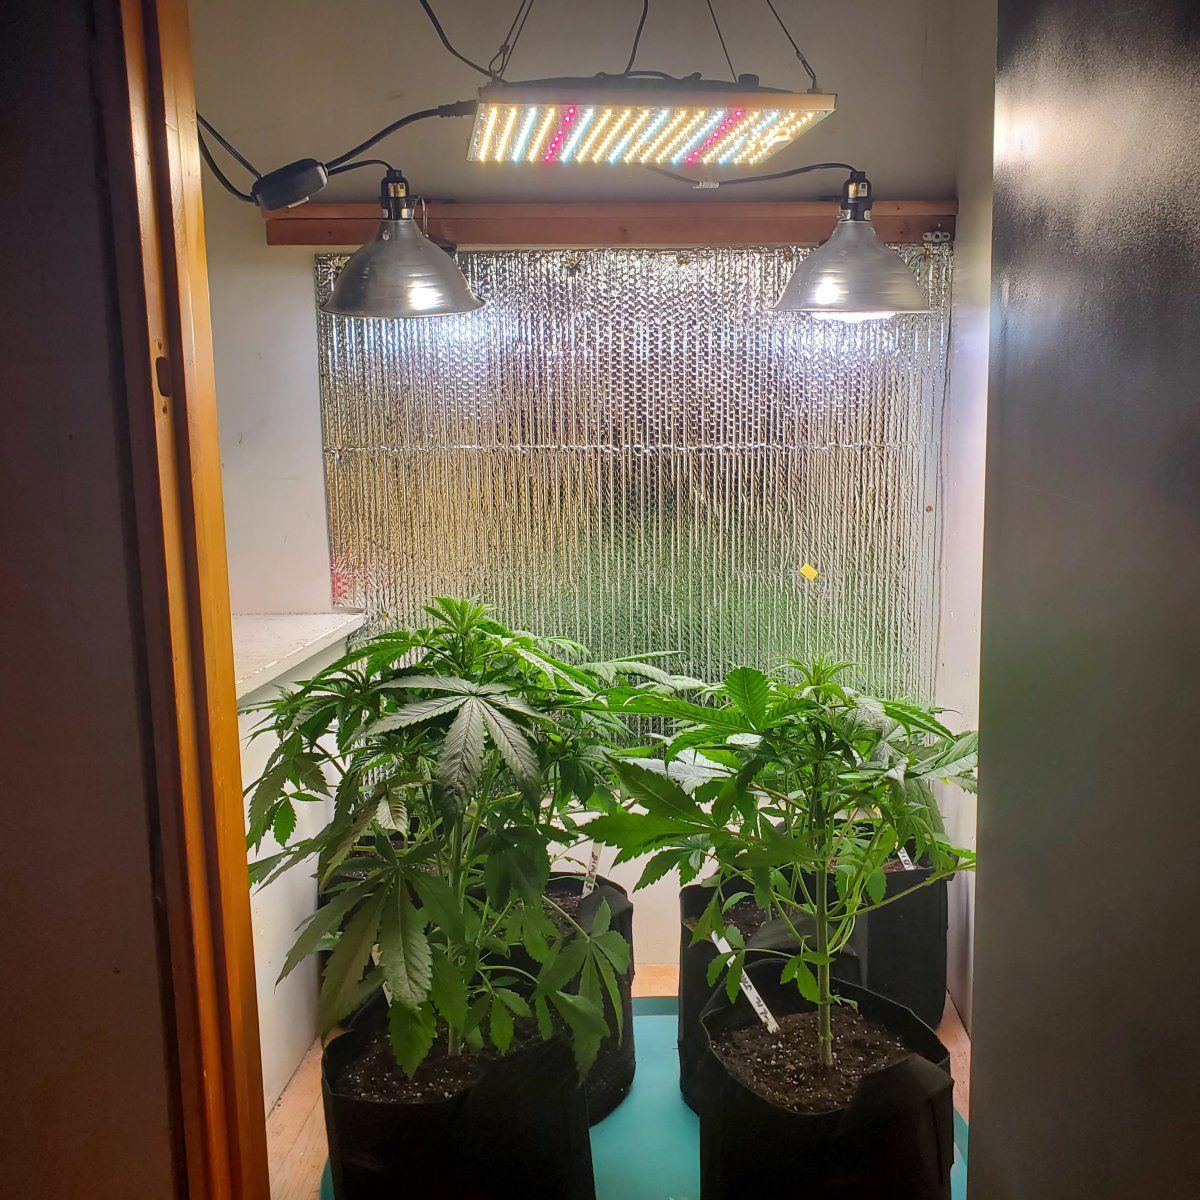 New herewould love advice on 1st indoor growpics  specifics in post 2